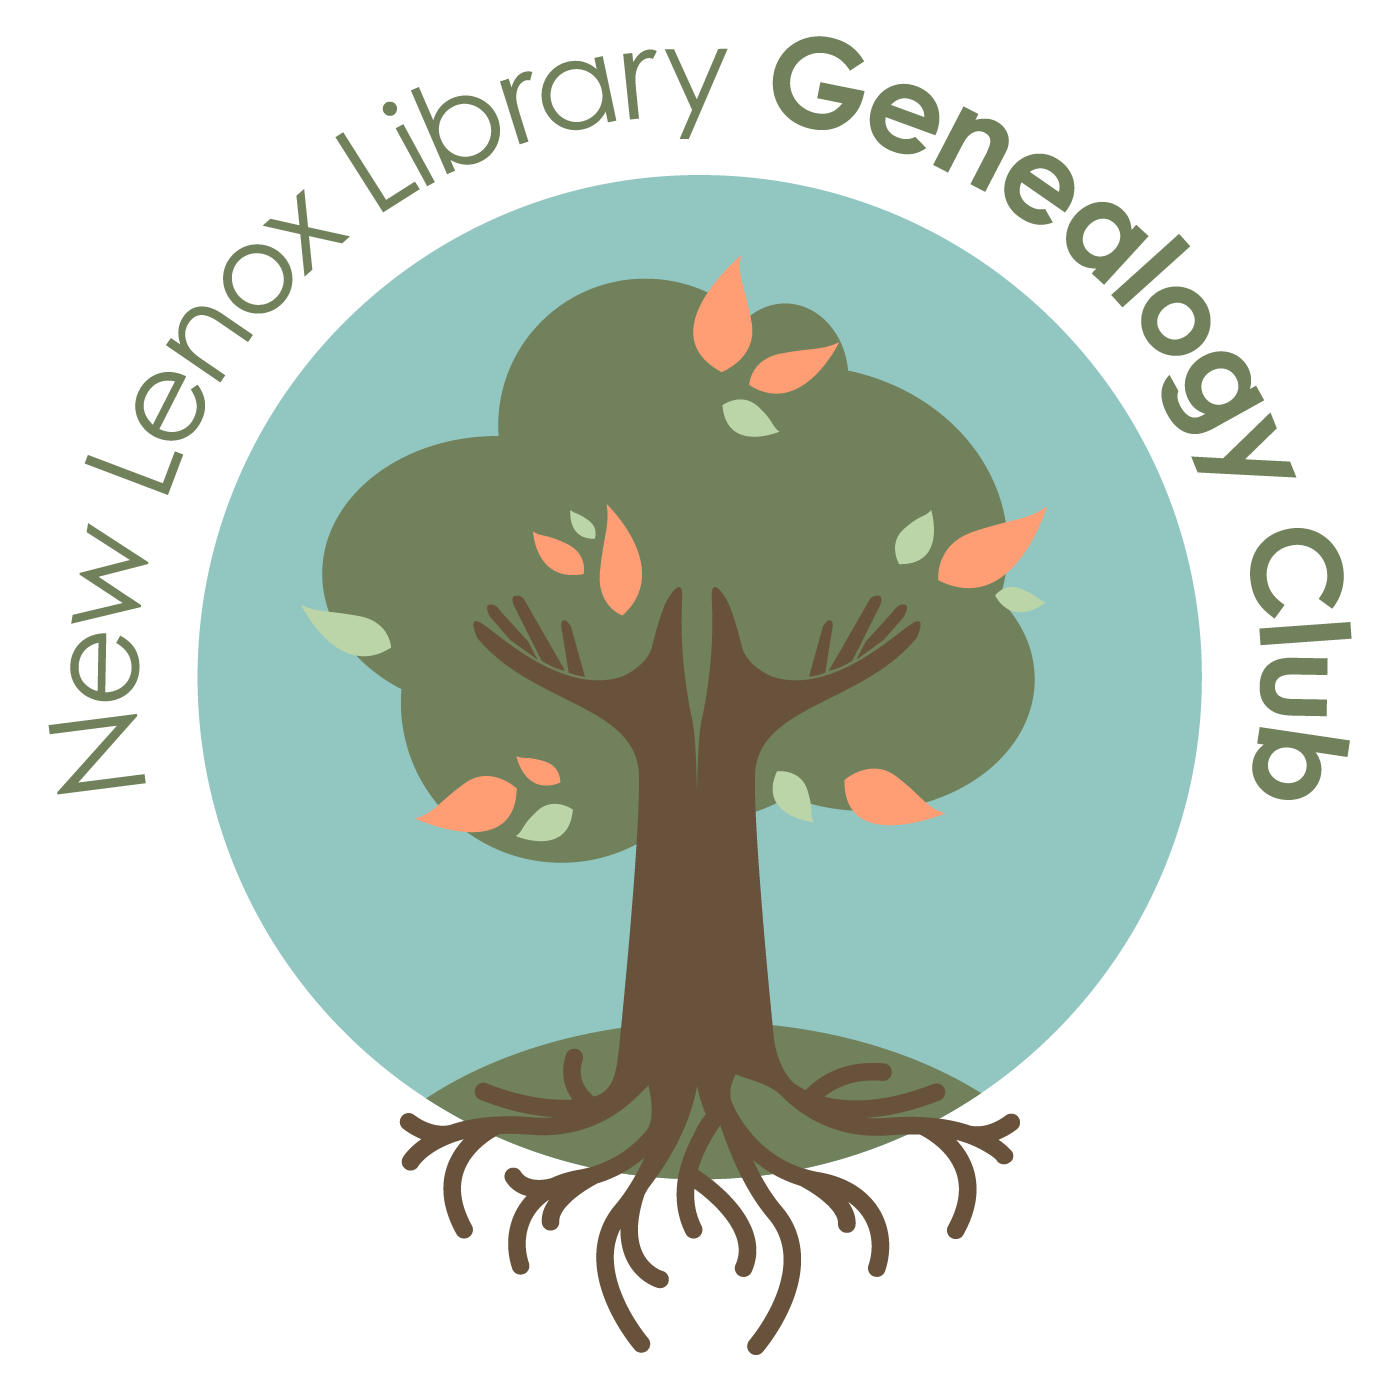 Genealogy Club (blue logo of tree with hands)